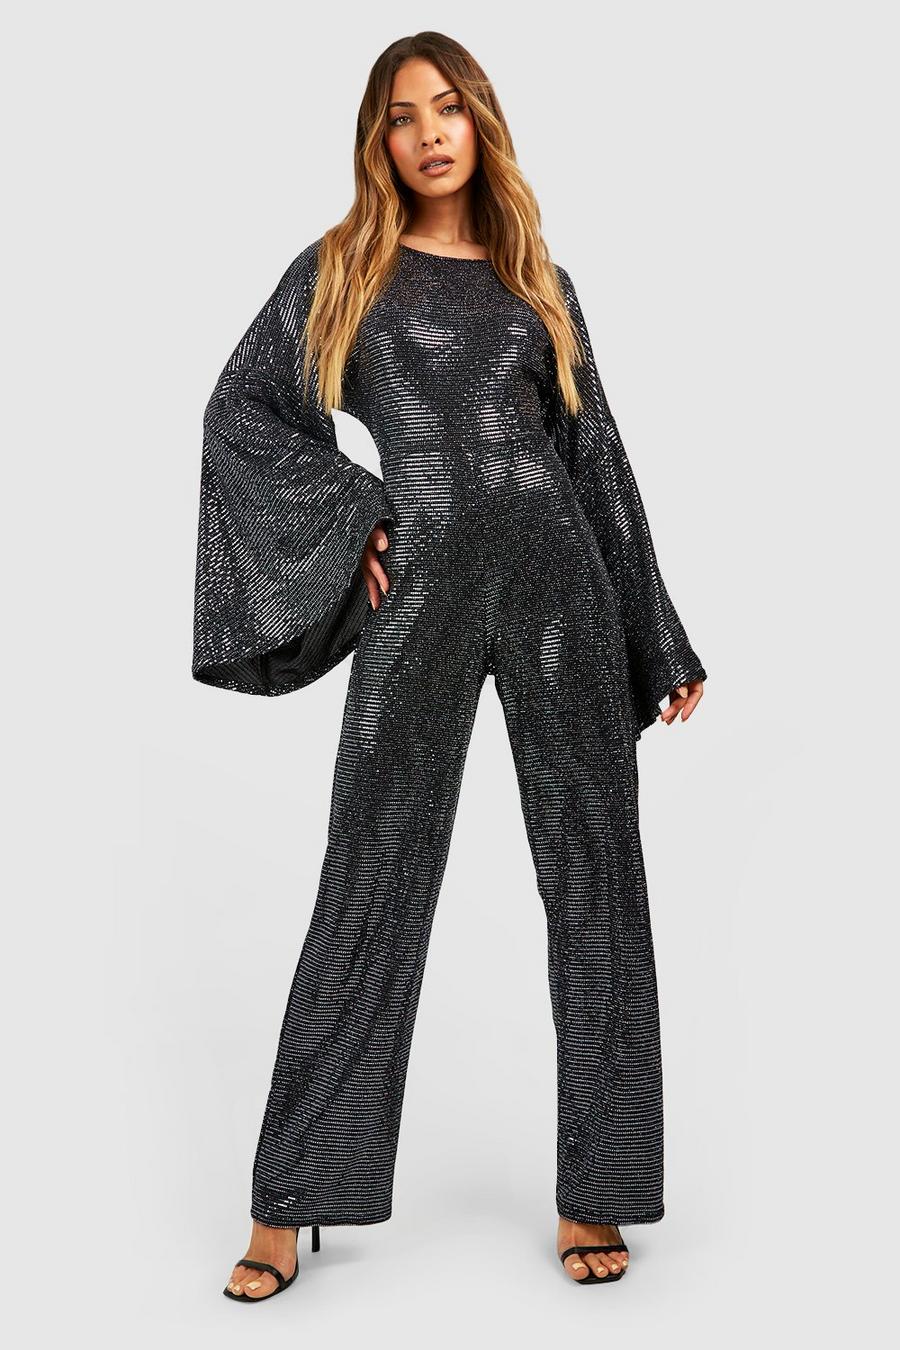 Charcoal Sequin Extreme Flare Sleeve Jumpsuit